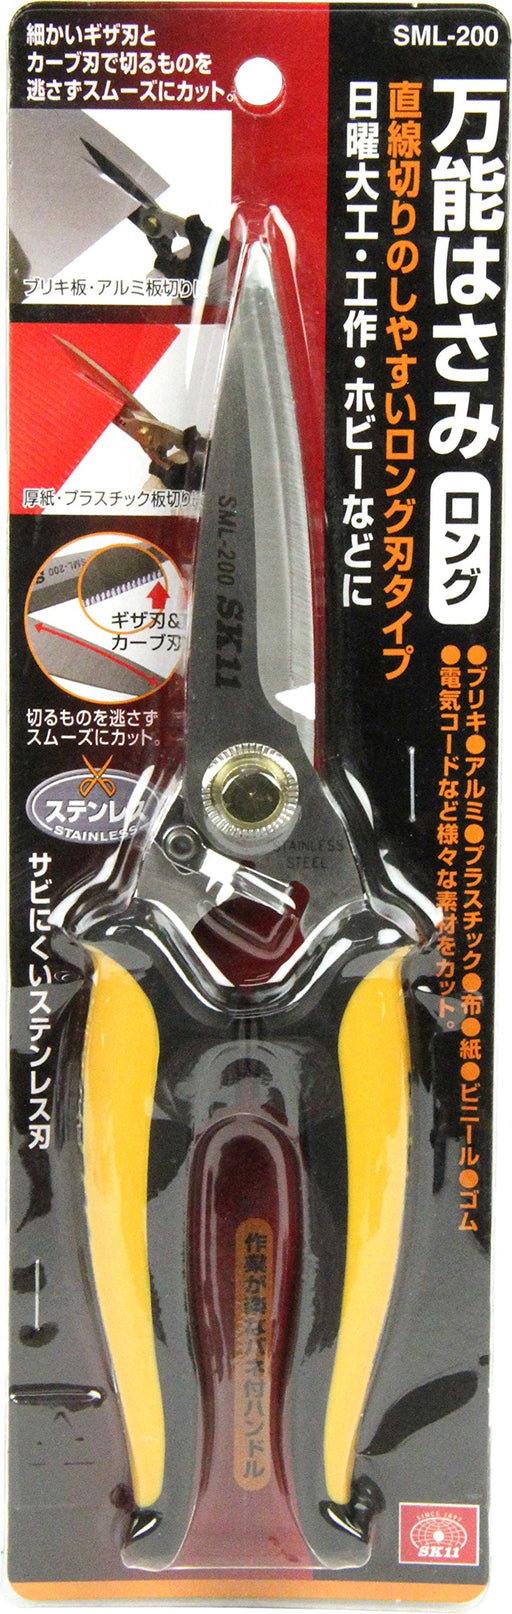 SK11 All-purpose scissors long SML-200 For work Big work Outdoor use Yellow NEW_2